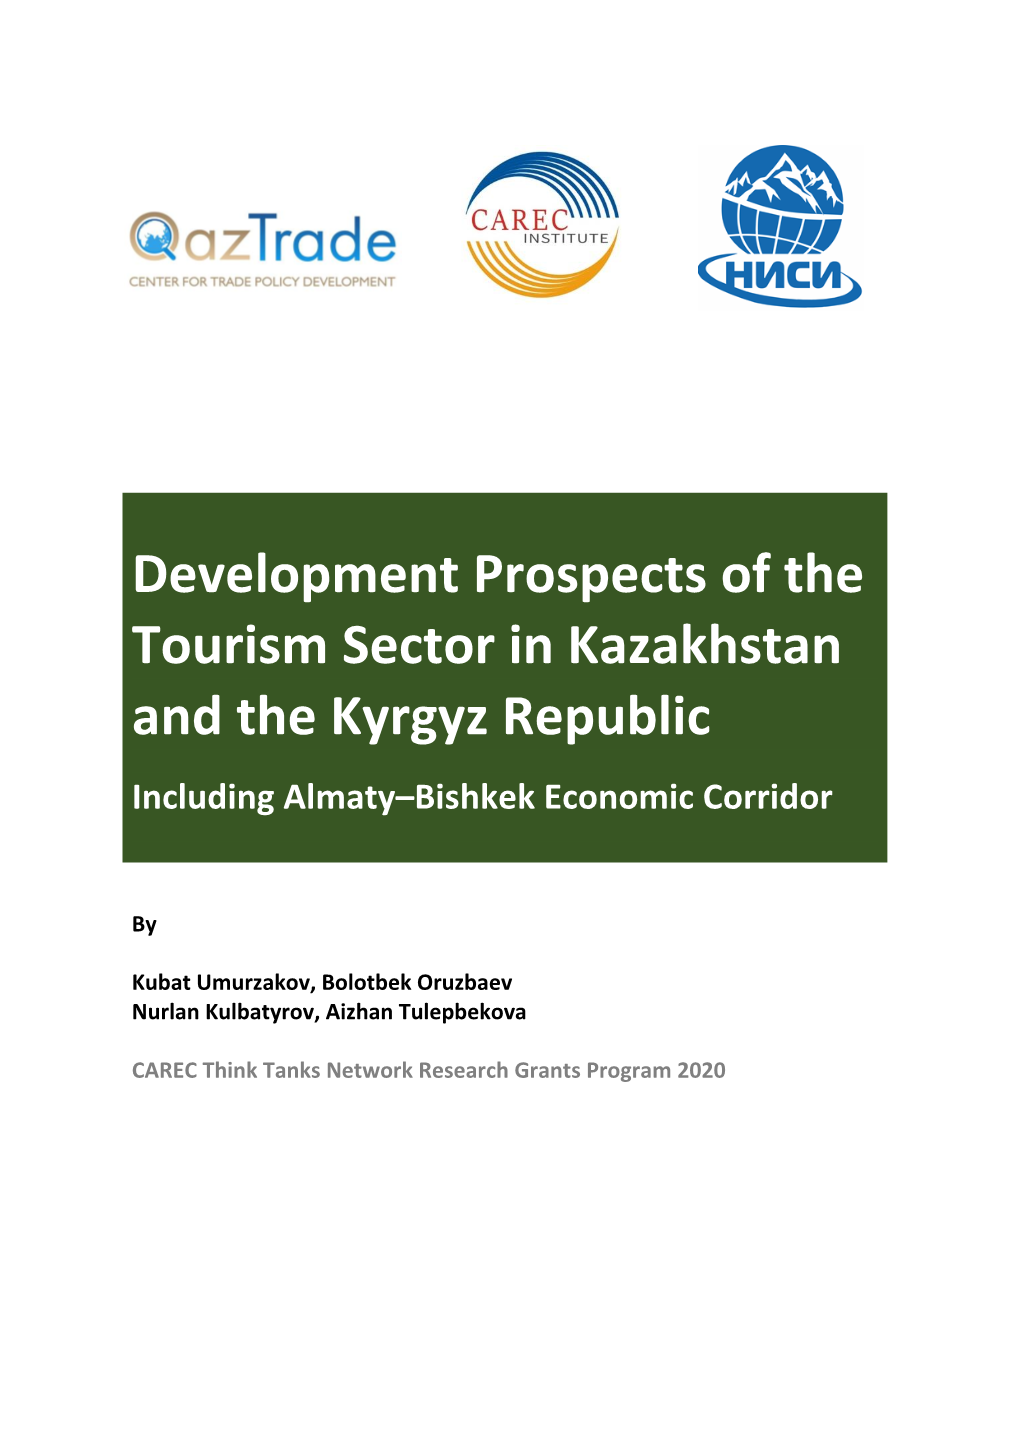 Development Prospects of the Tourism Sector in Kazakhstan and the Kyrgyz Republic